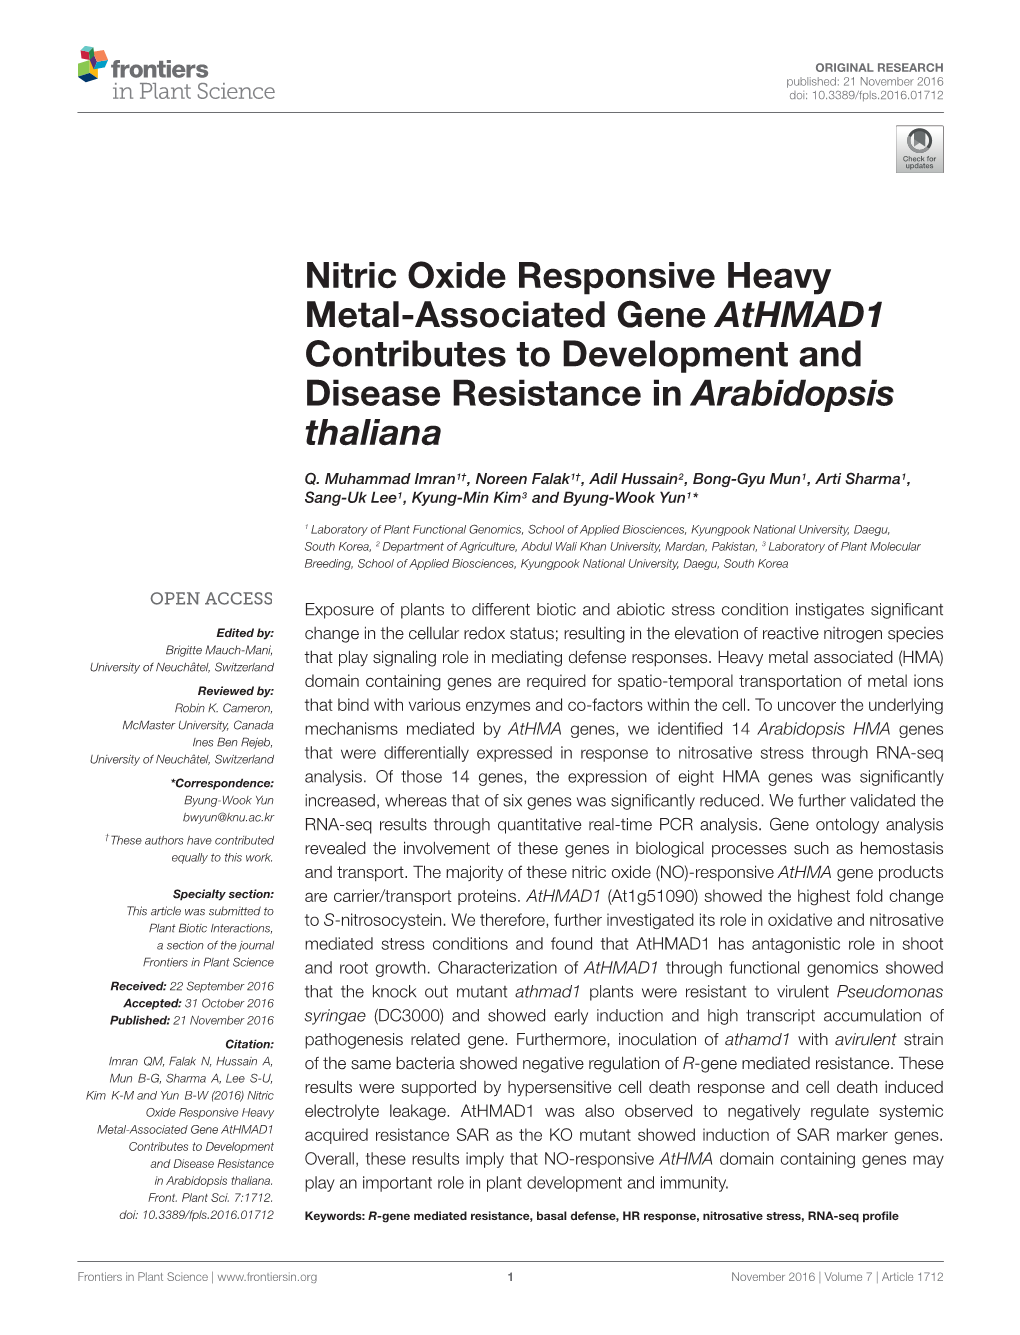 Nitric Oxide Responsive Heavy Metal-Associated Gene Athmad1 Contributes to Development and Disease Resistance in Arabidopsis Thaliana